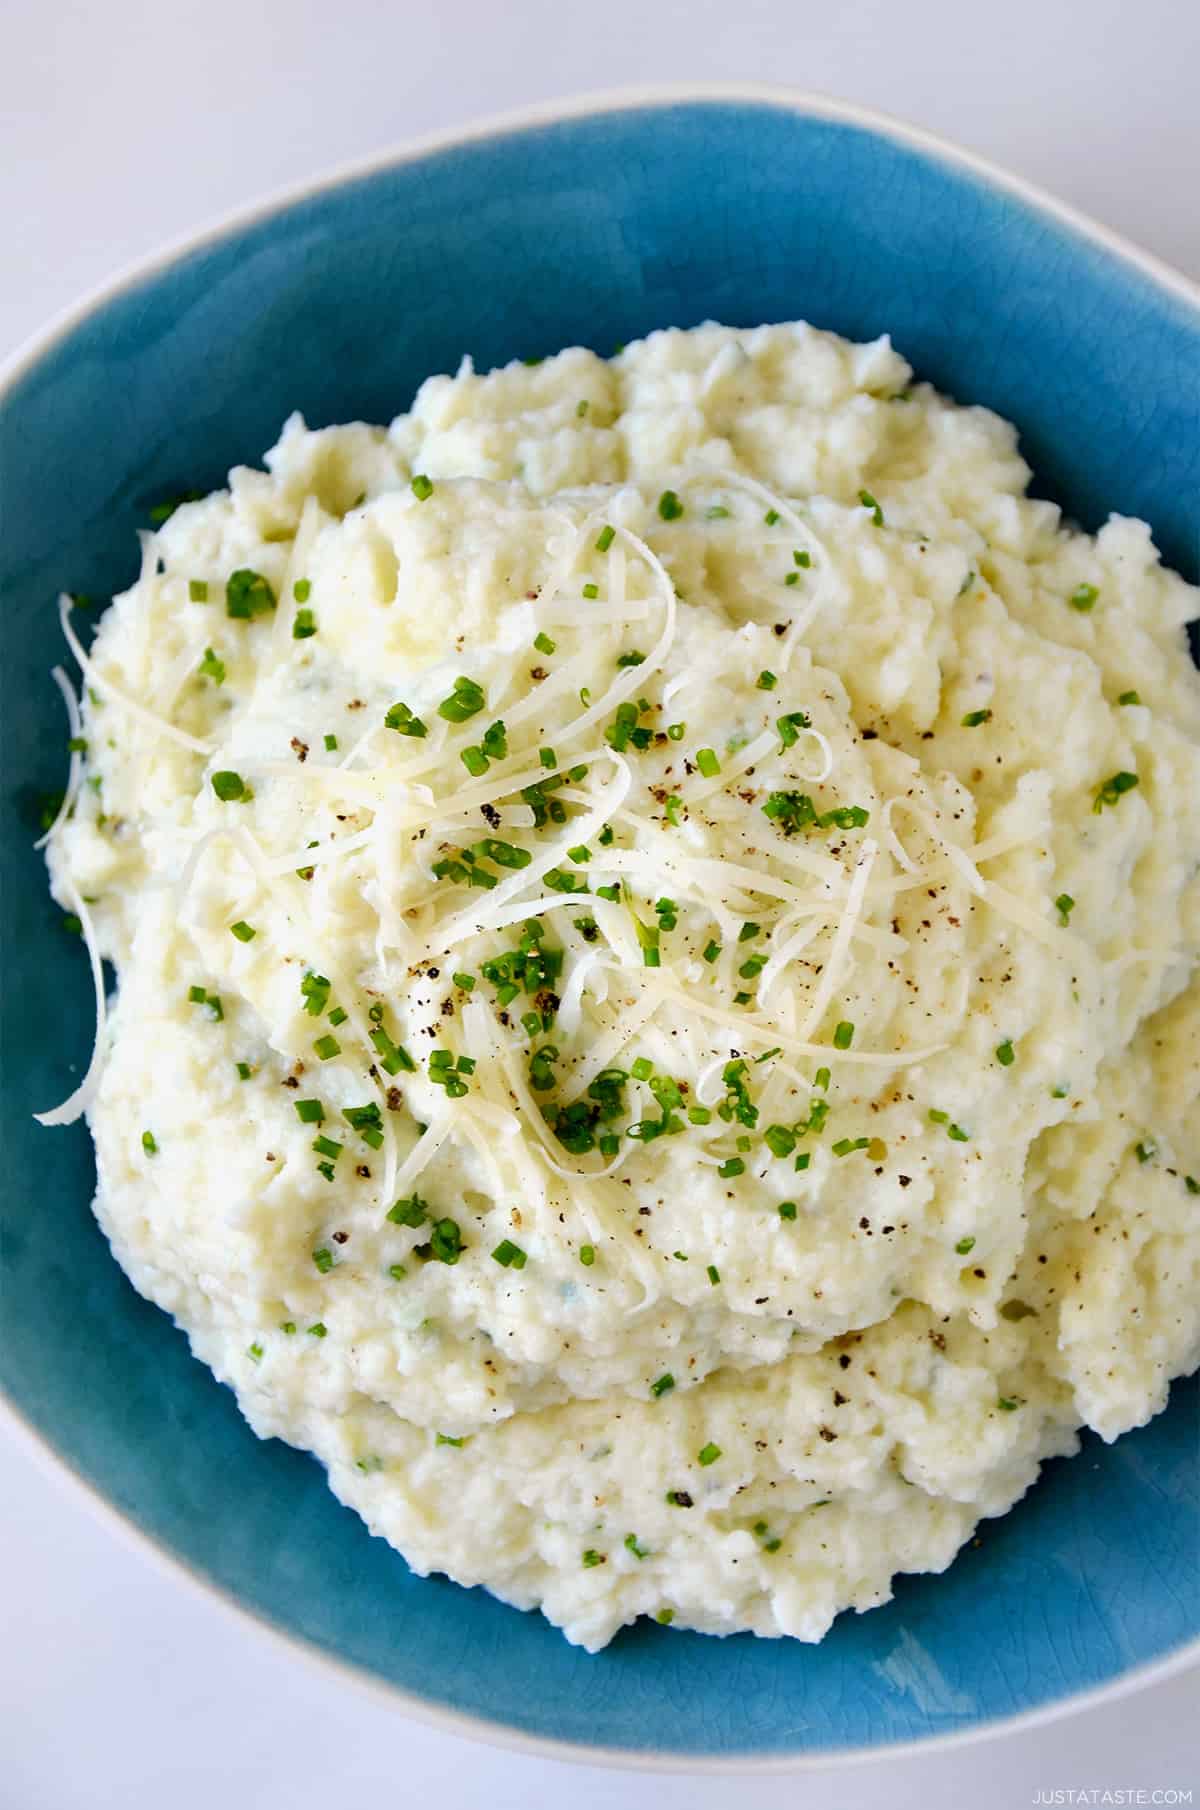 Mashed cauliflower topped with shredded cheese, finely minced chives and black pepper in a blue bowl.